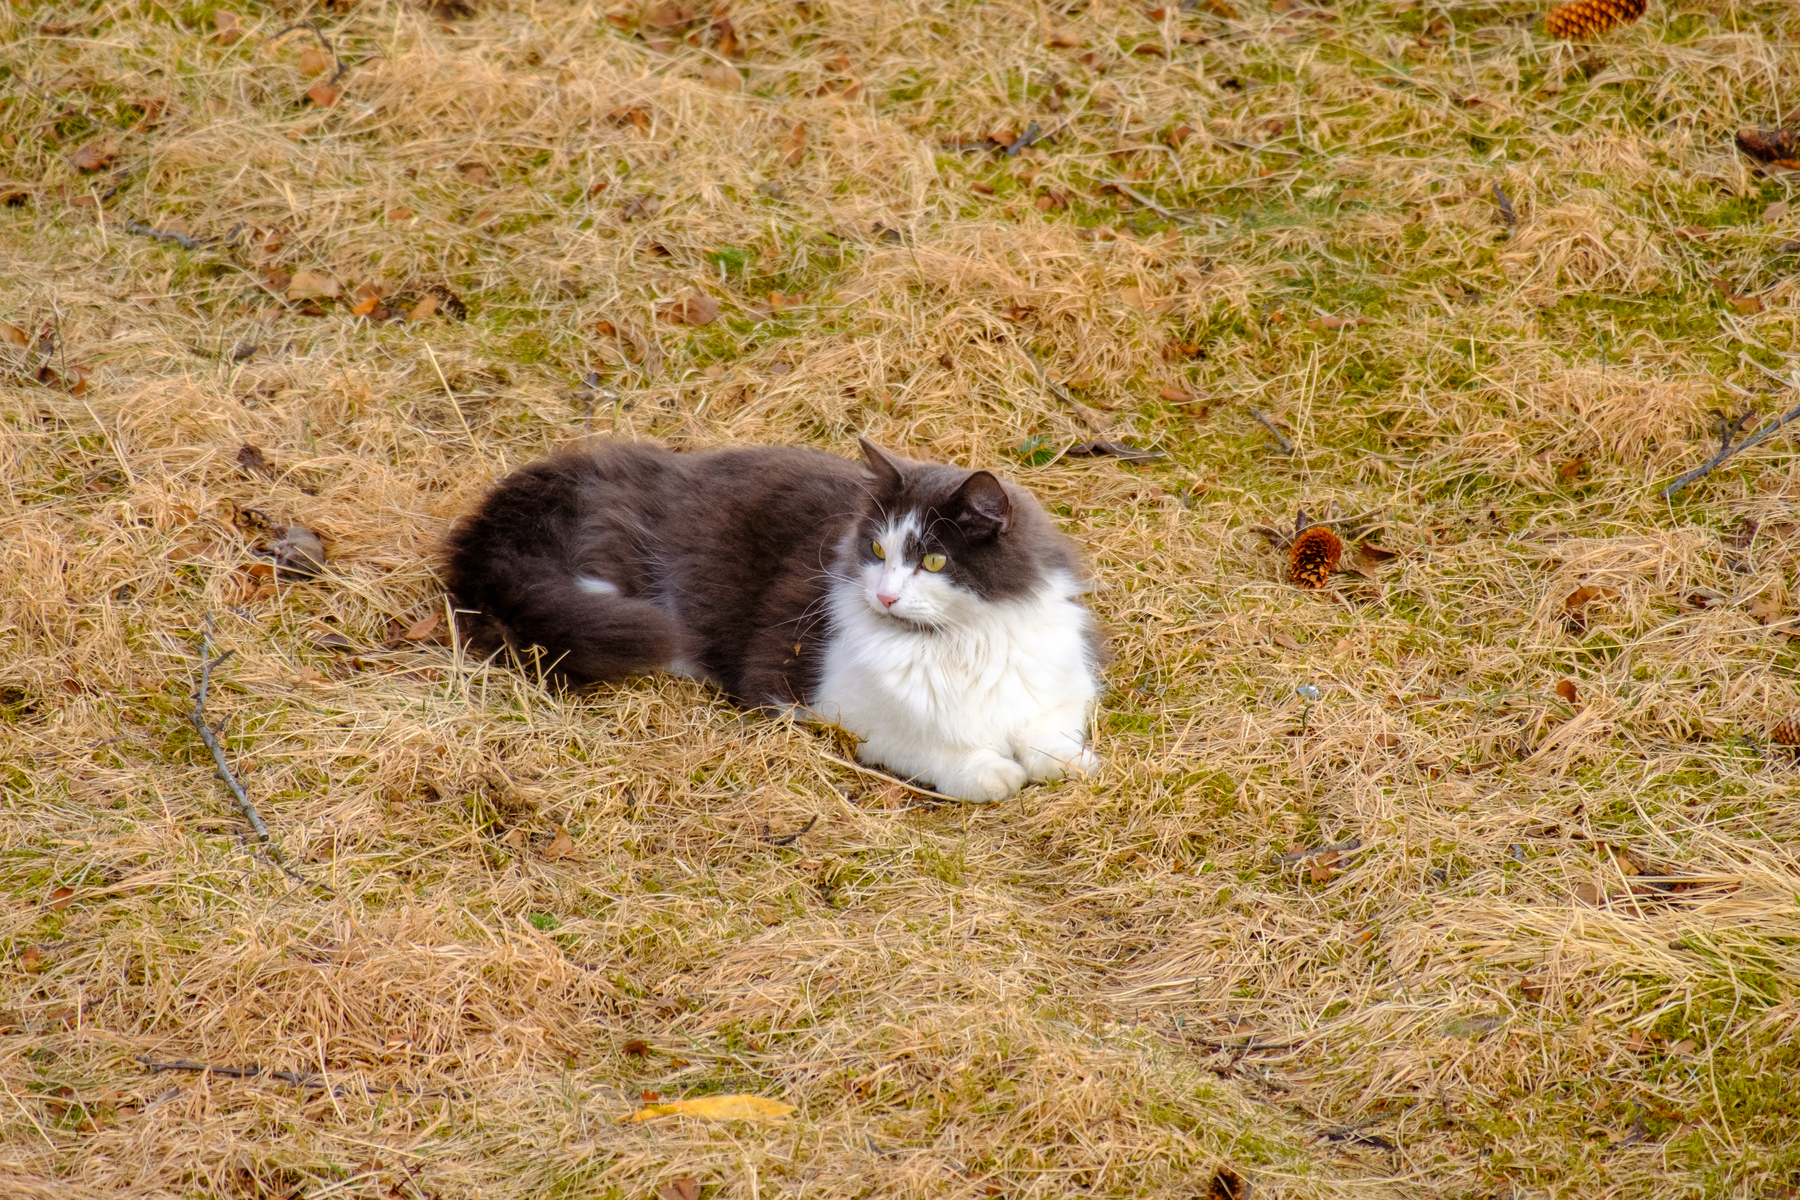 Another grey and white long-haired cat out having fun in the grass